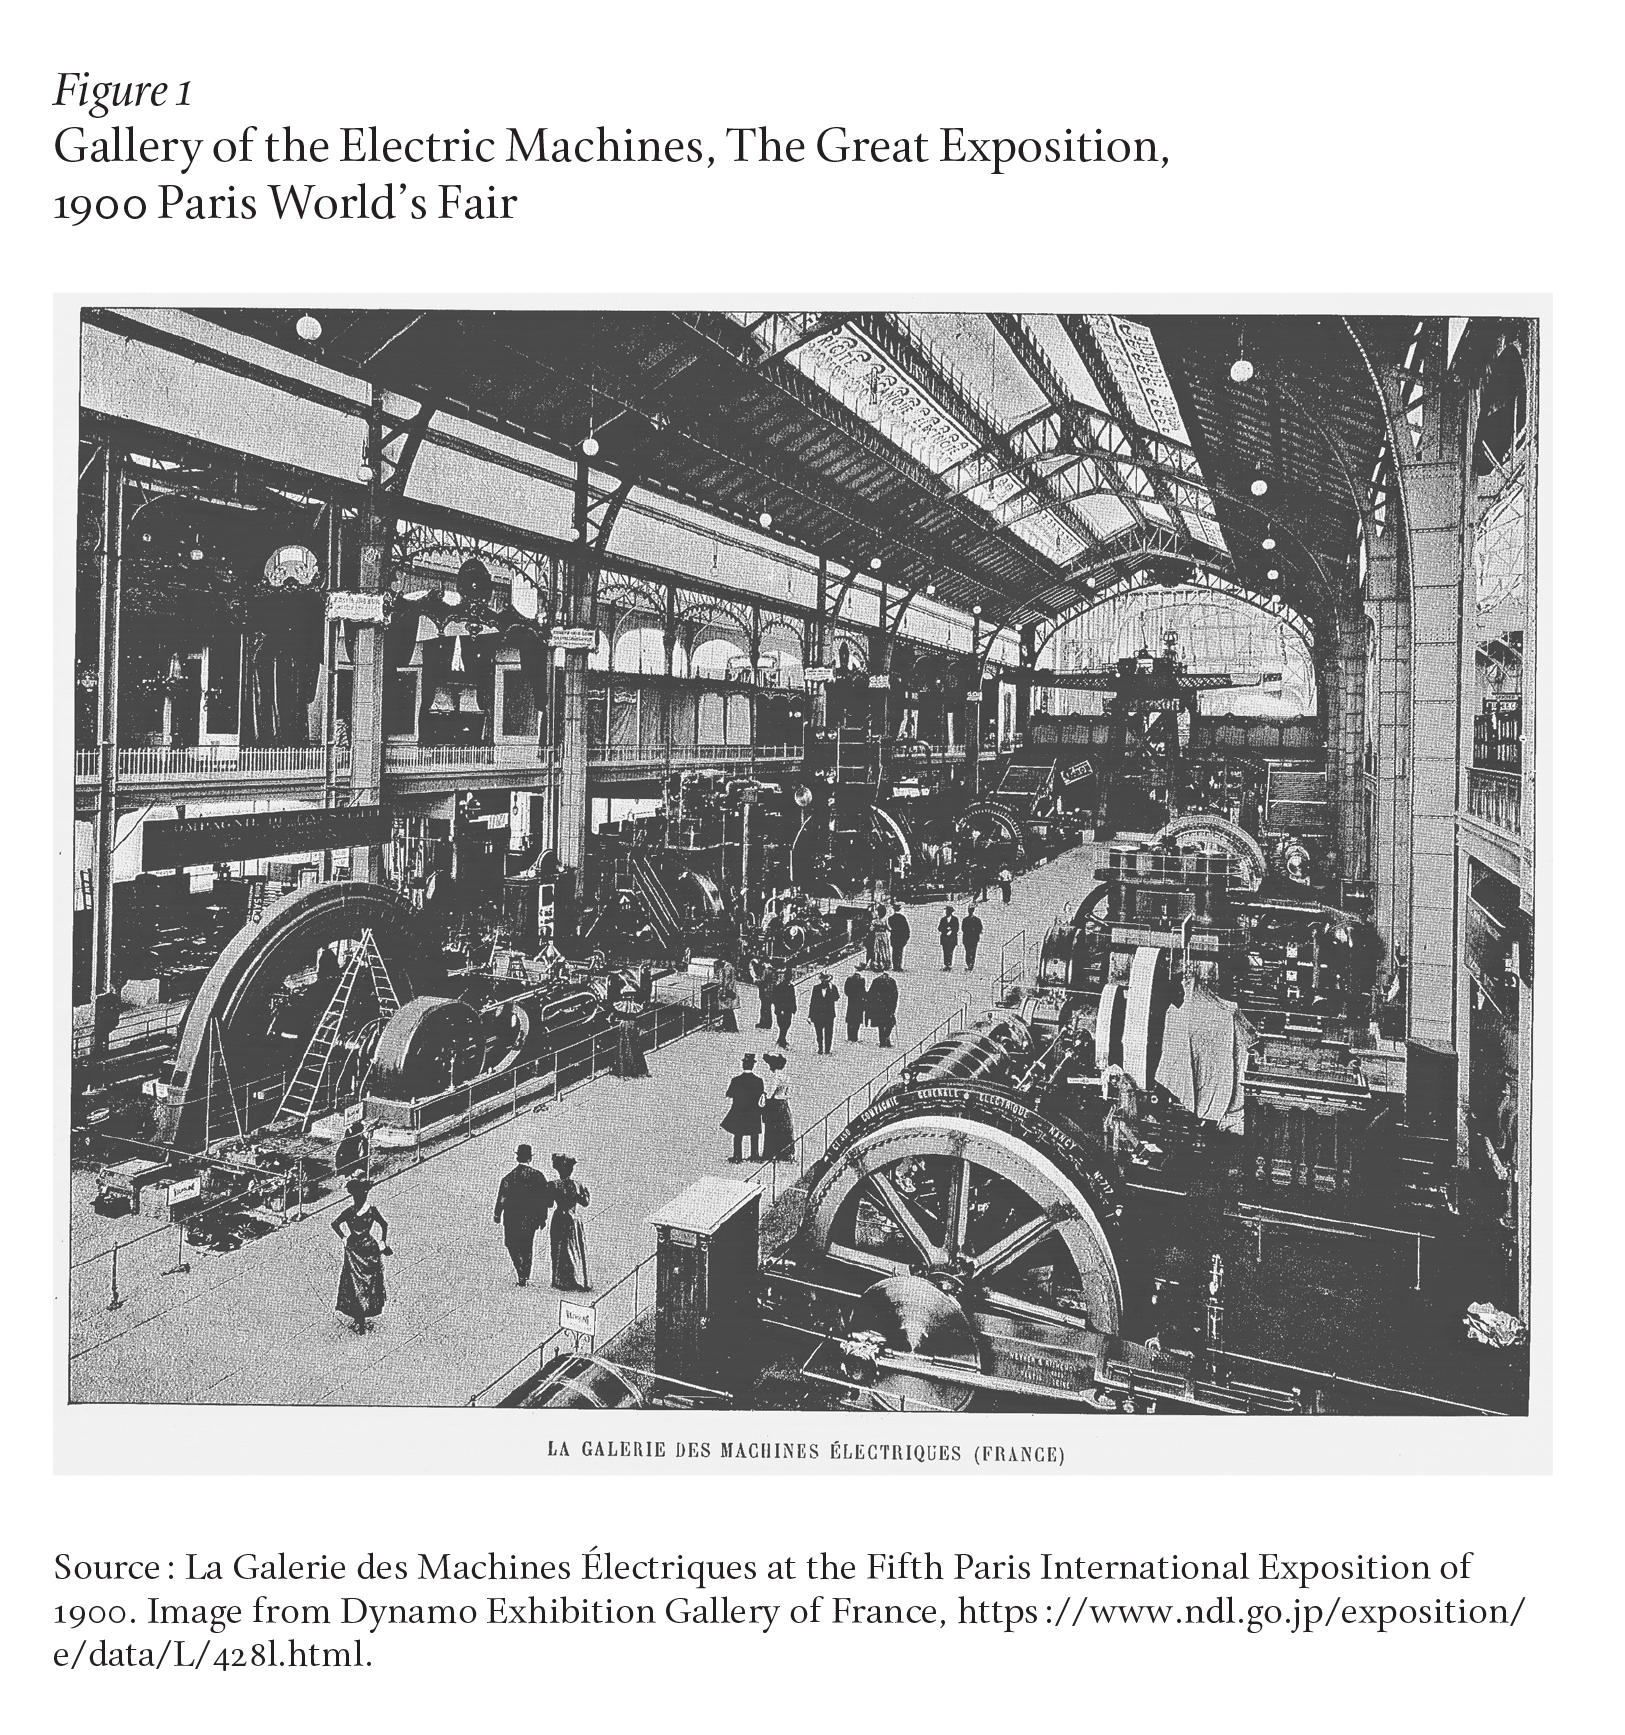 Gallery of the Electric Machines, The Great Exposition, 1900 Paris World’s Fair